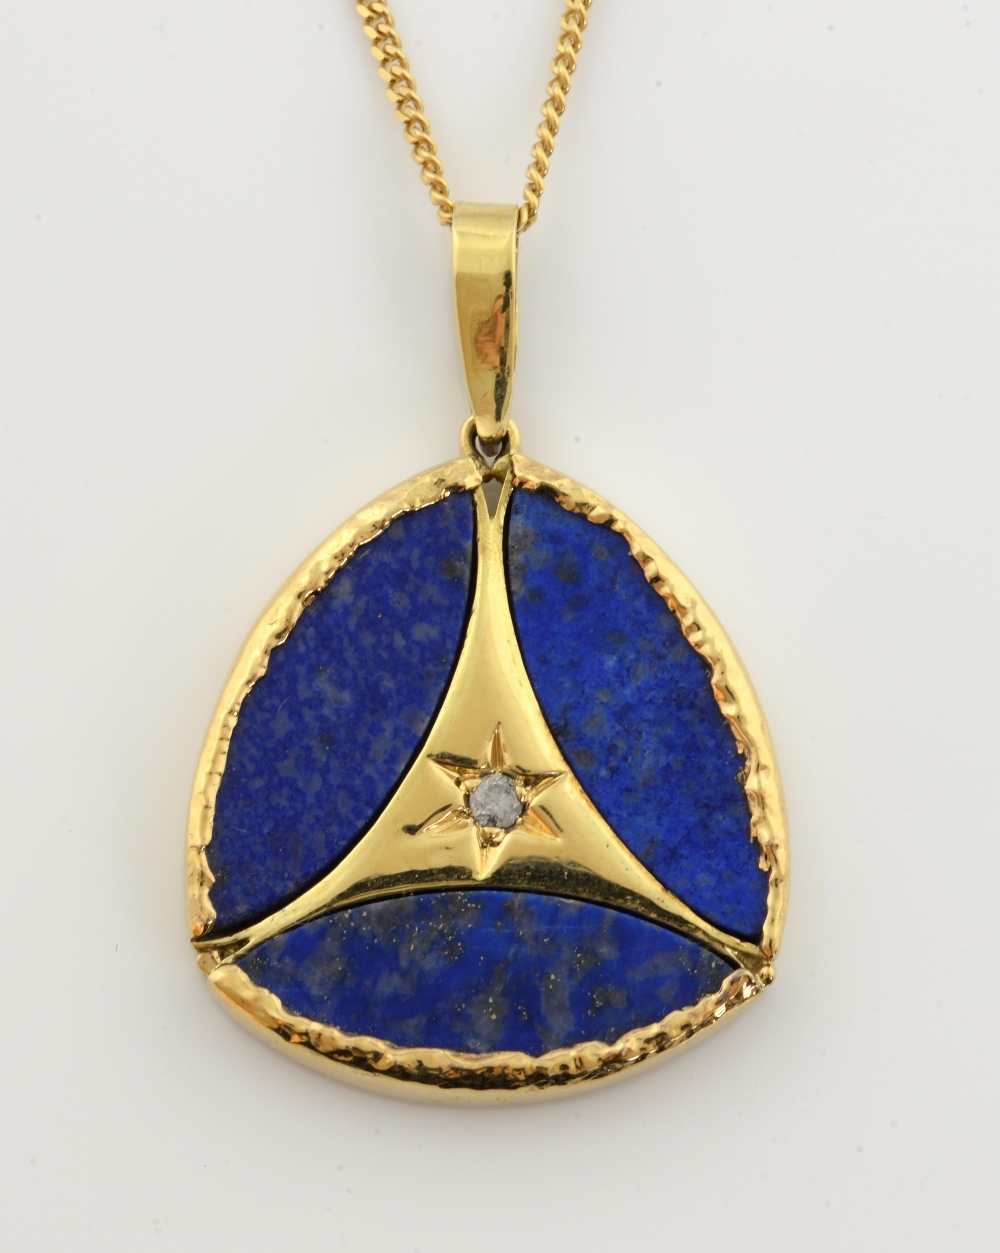 Lapis Lazuli and diamond pendant, round cut diamond, with three marquise shaped plaques, set in 18ct